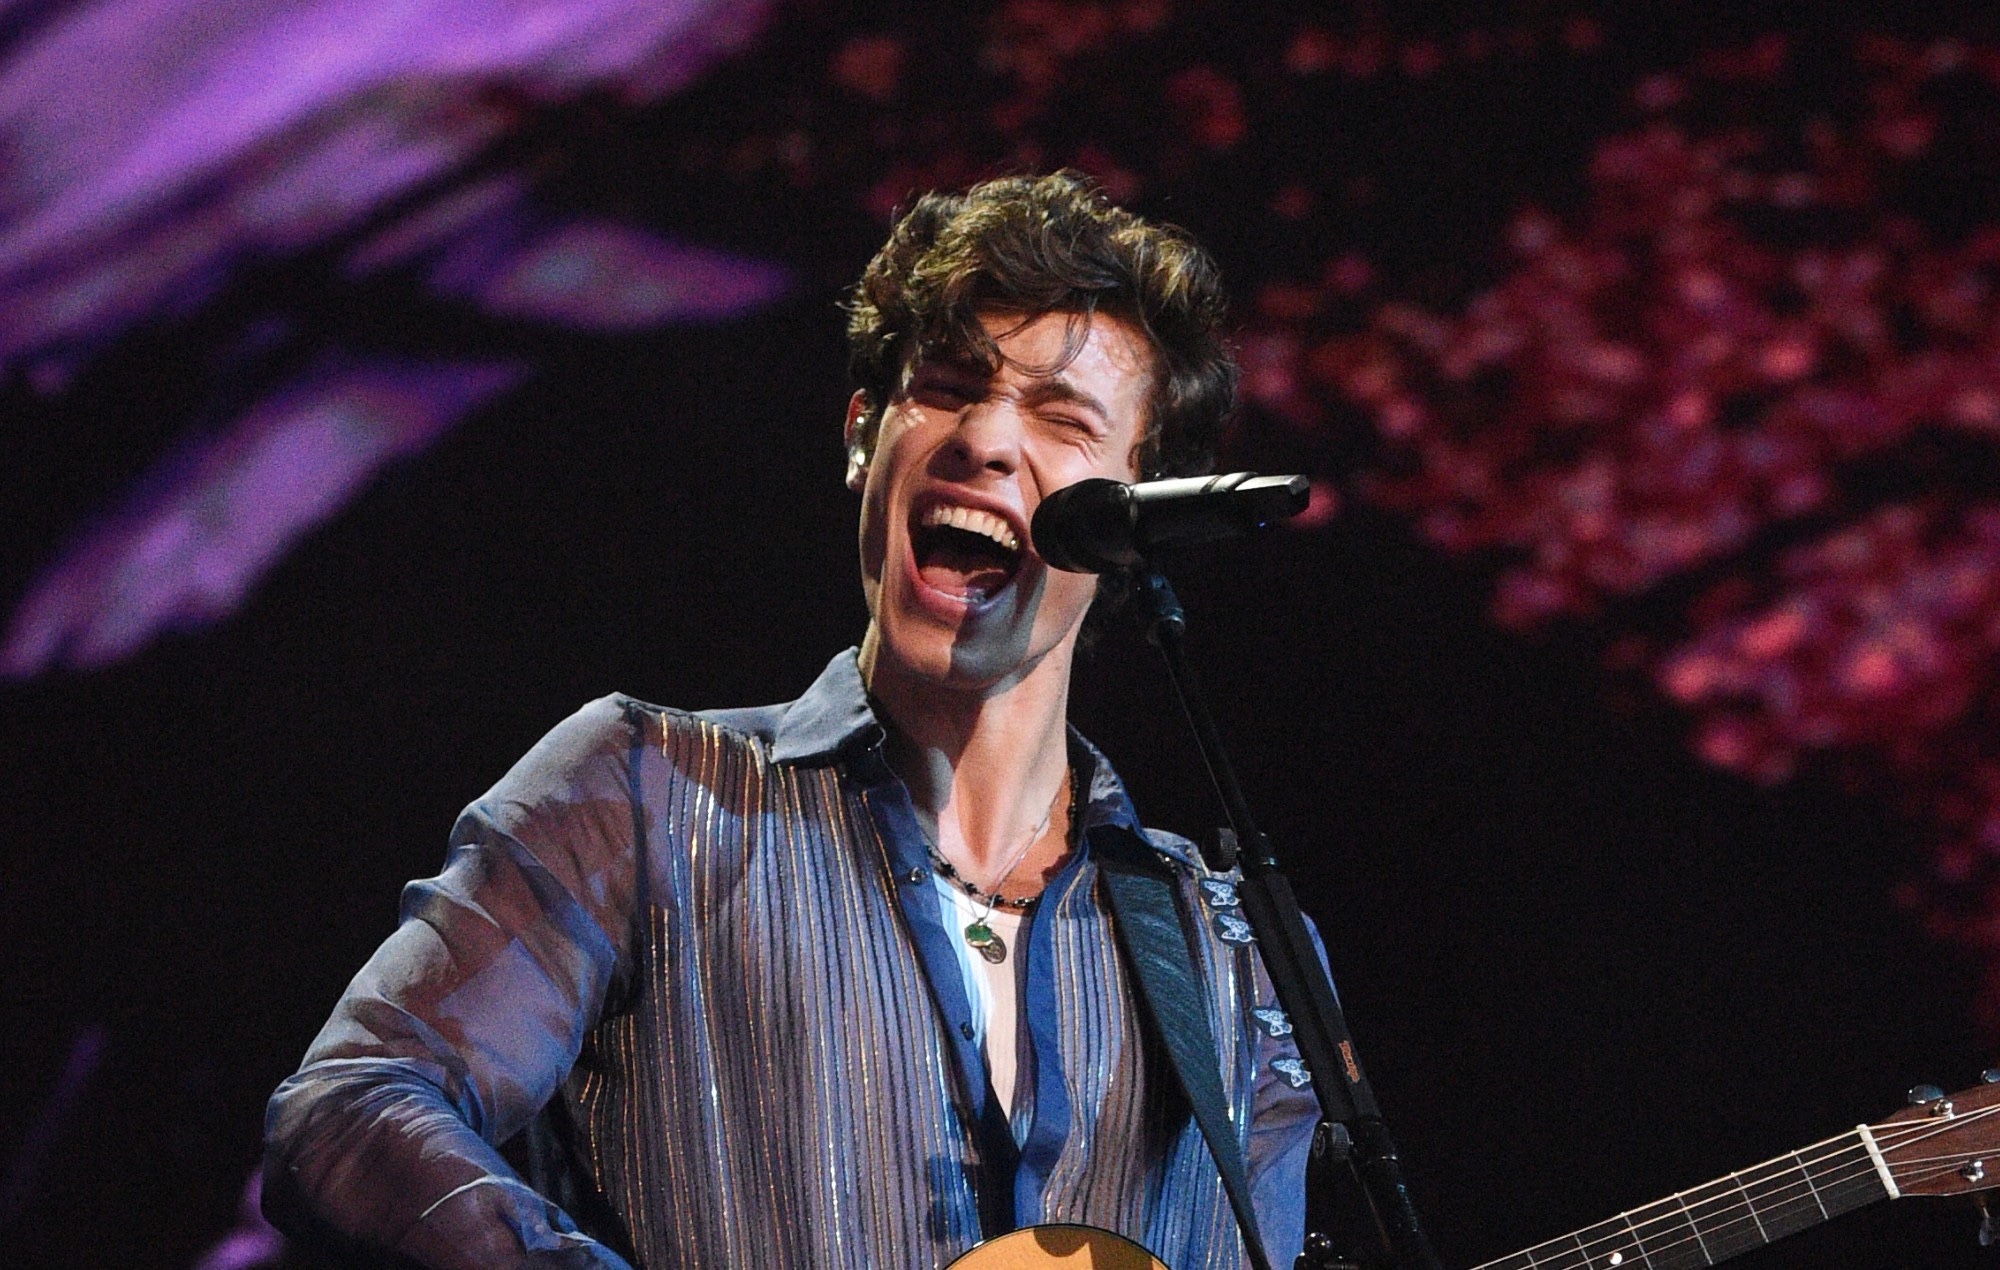 Shawn Mendes postpones world tour to ‘take care of his mental health’